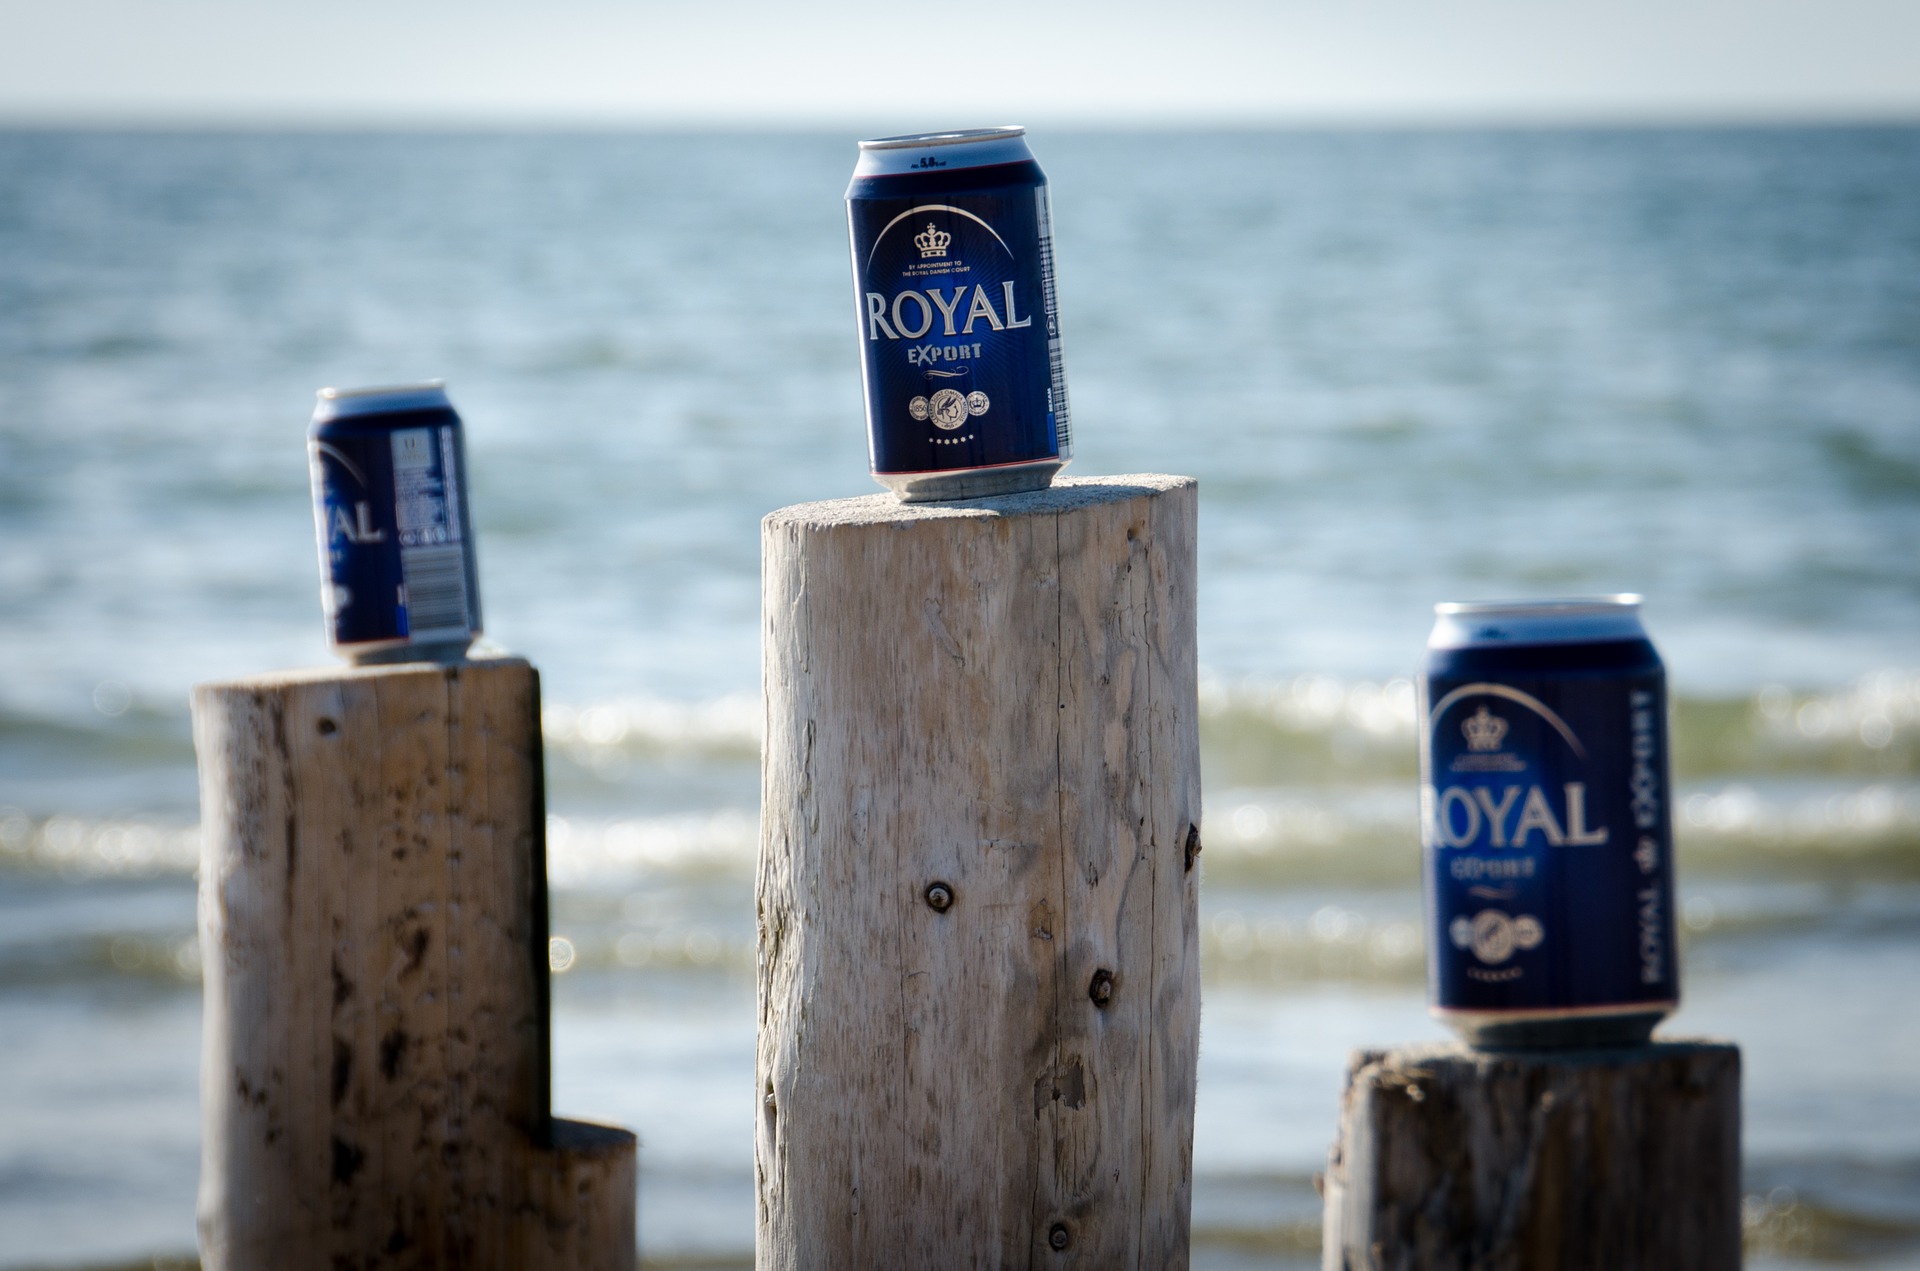 Beers lined up along beach pilings